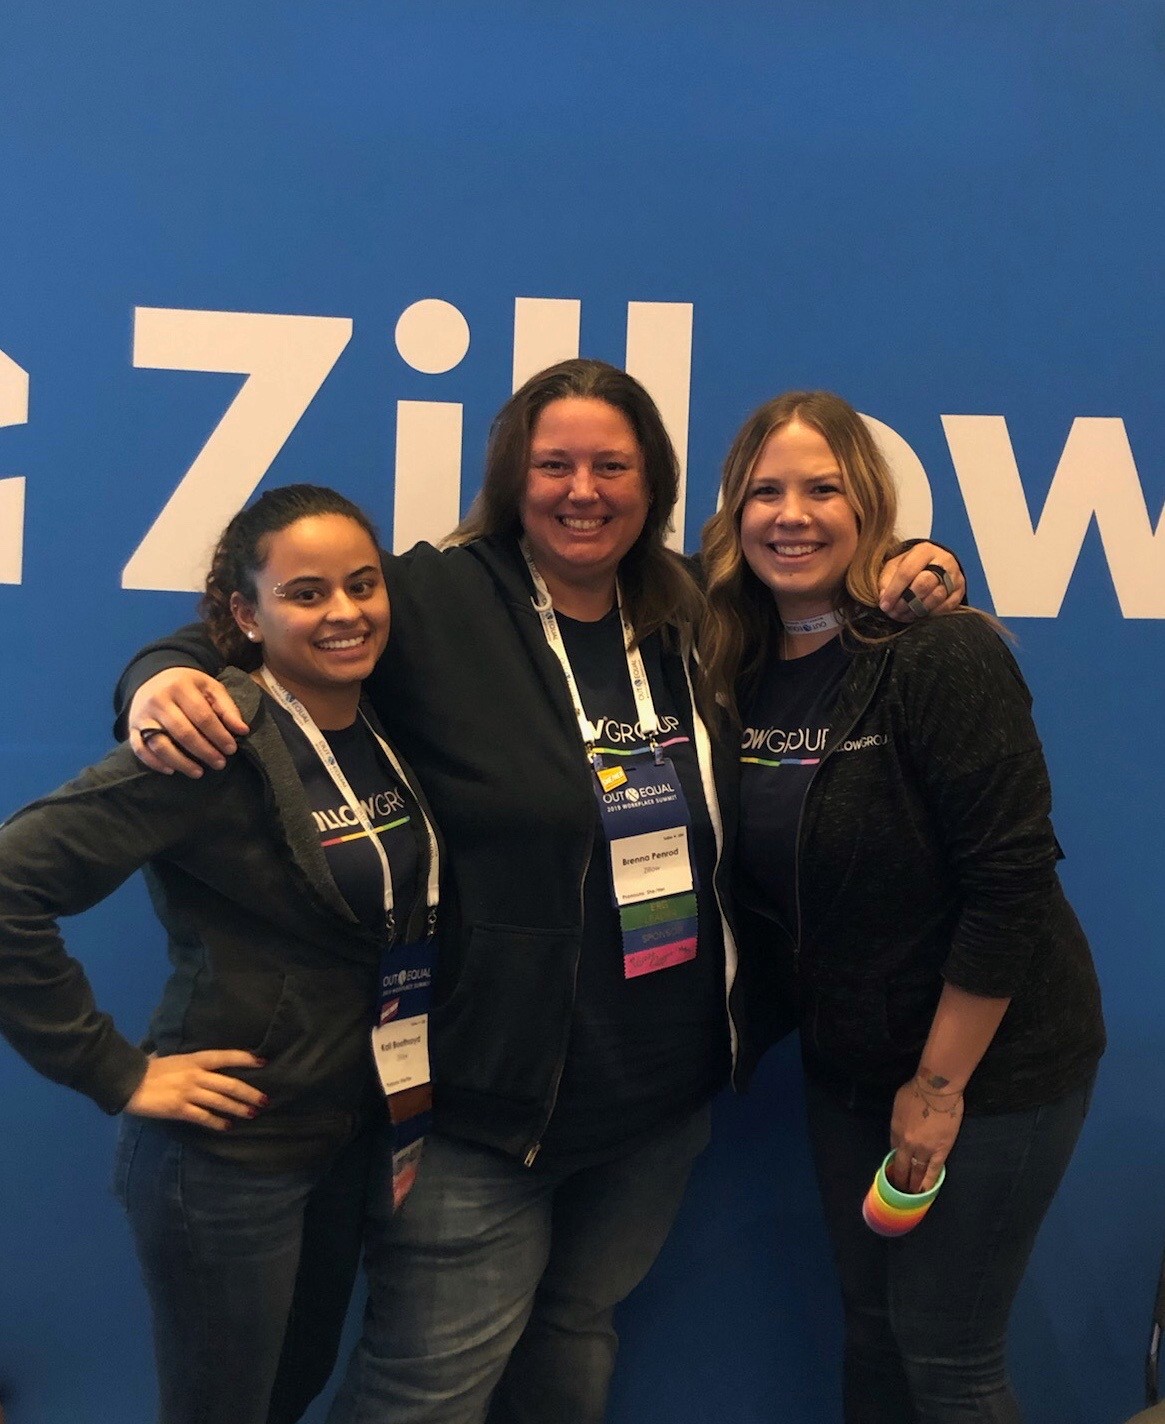 Three Zillow Pride affinity network members posing shoulder to shoulder with Zillow brand banner behind them.